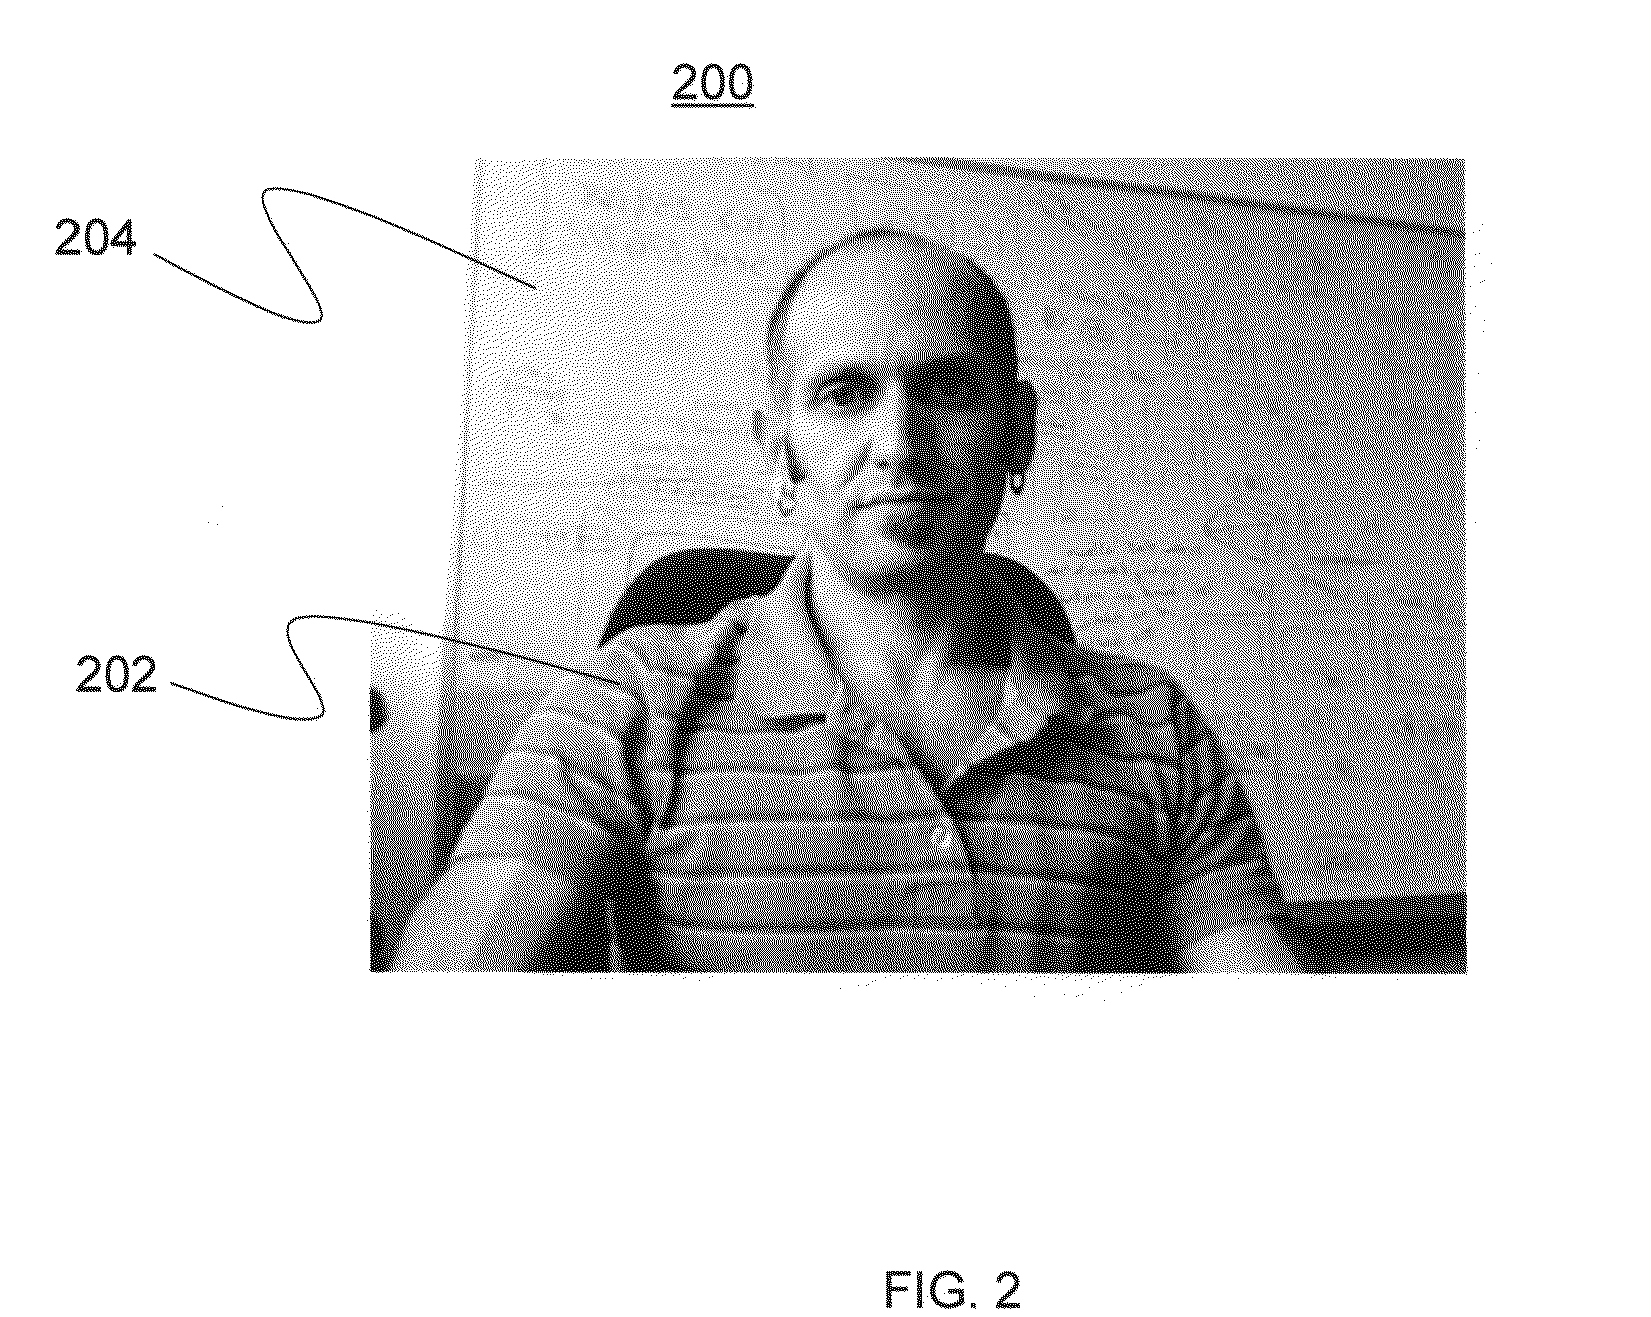 Systems and methods for incorporating reflection of a user and surrounding environment into a graphical user interface